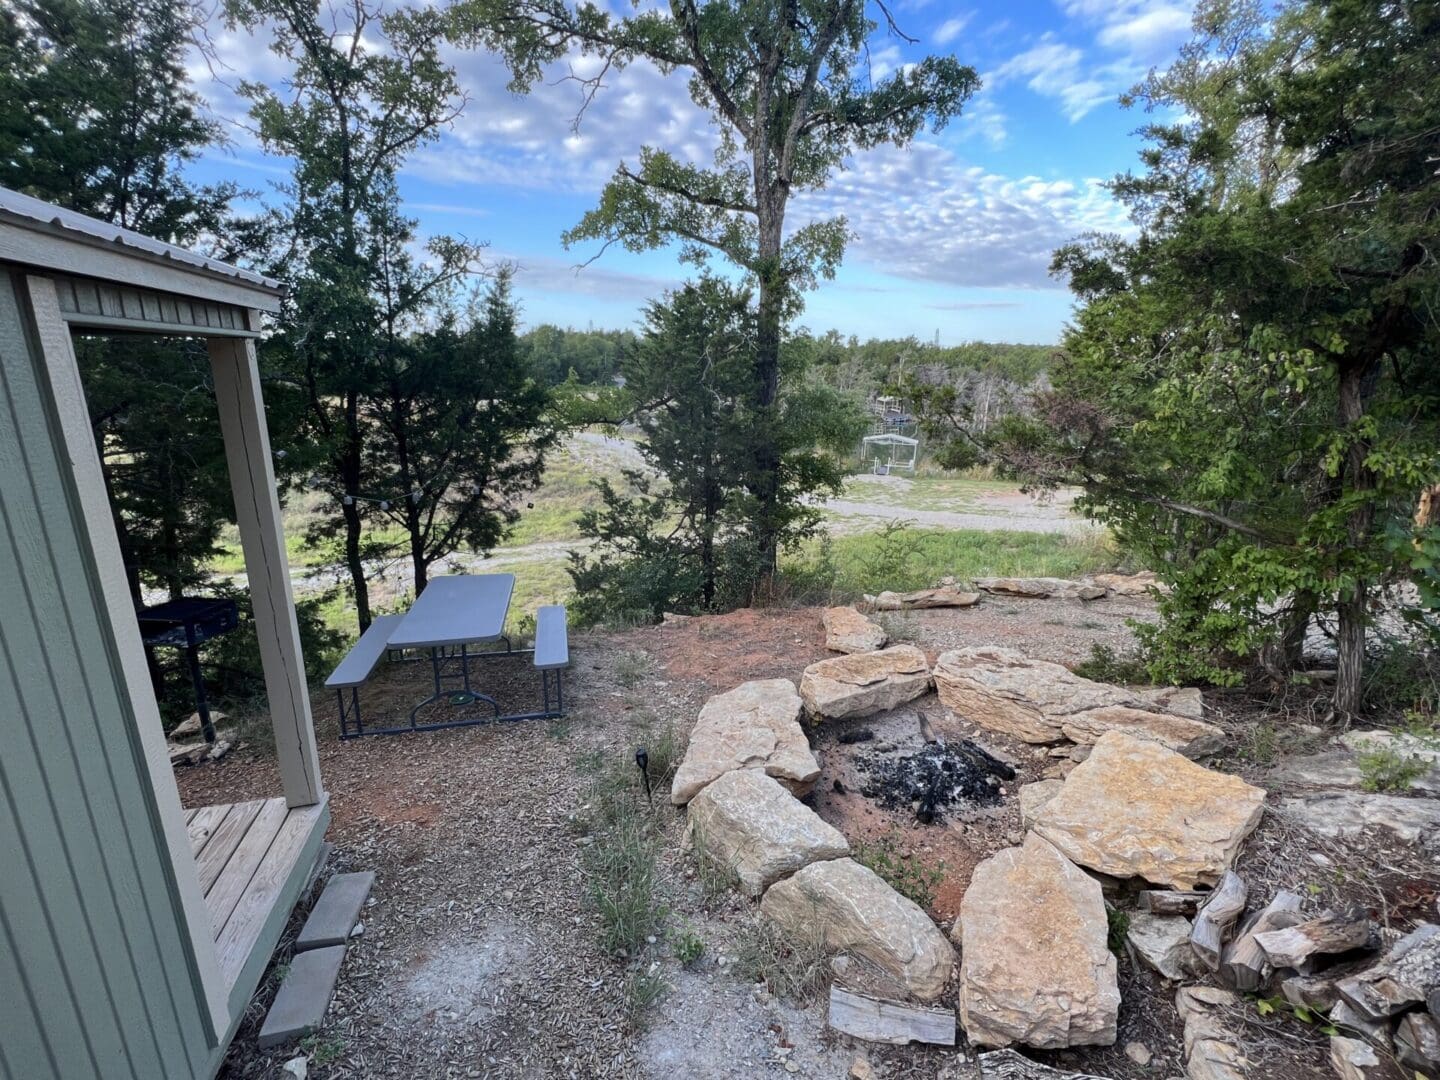 A stone fire pit area and the the picnic table outdoor